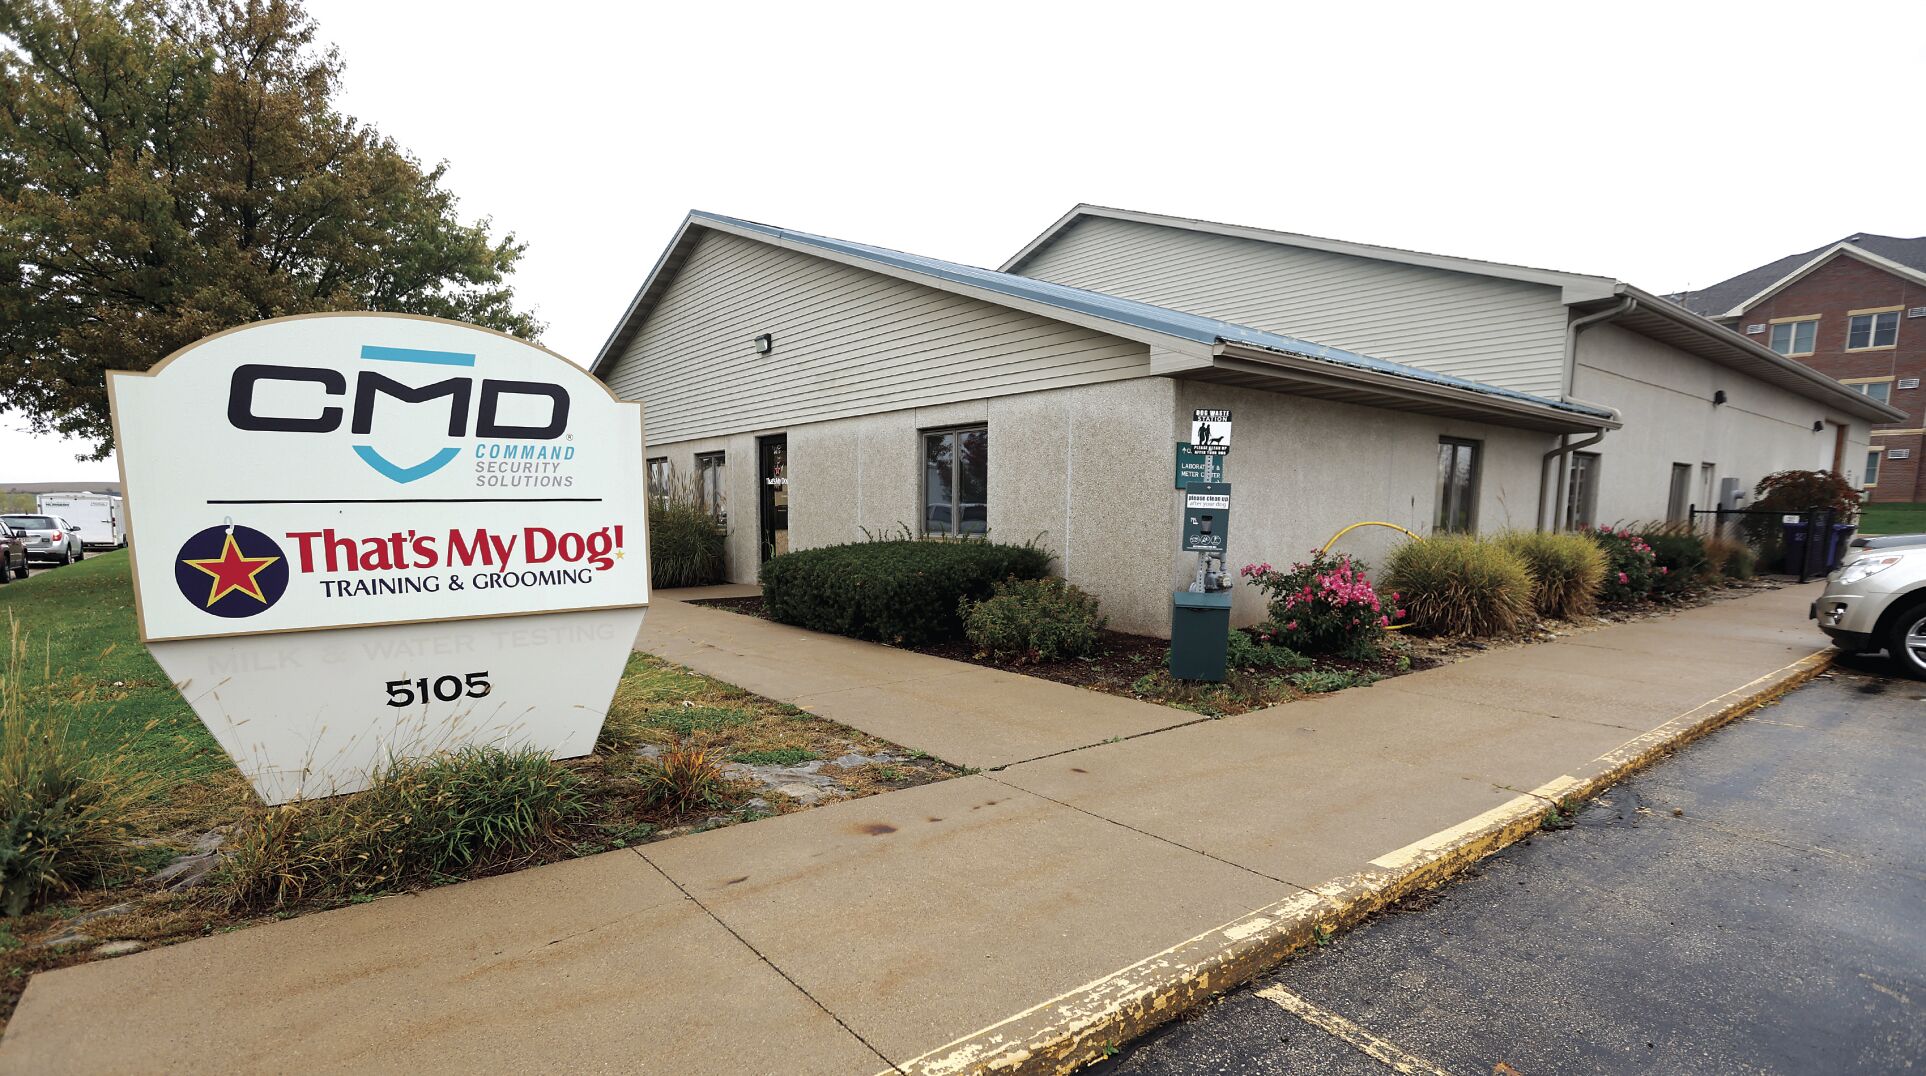 That’s My Dog! has added a second location at 5105 Wolff Road in Dubuque.    PHOTO CREDIT: JESSICA REILLY